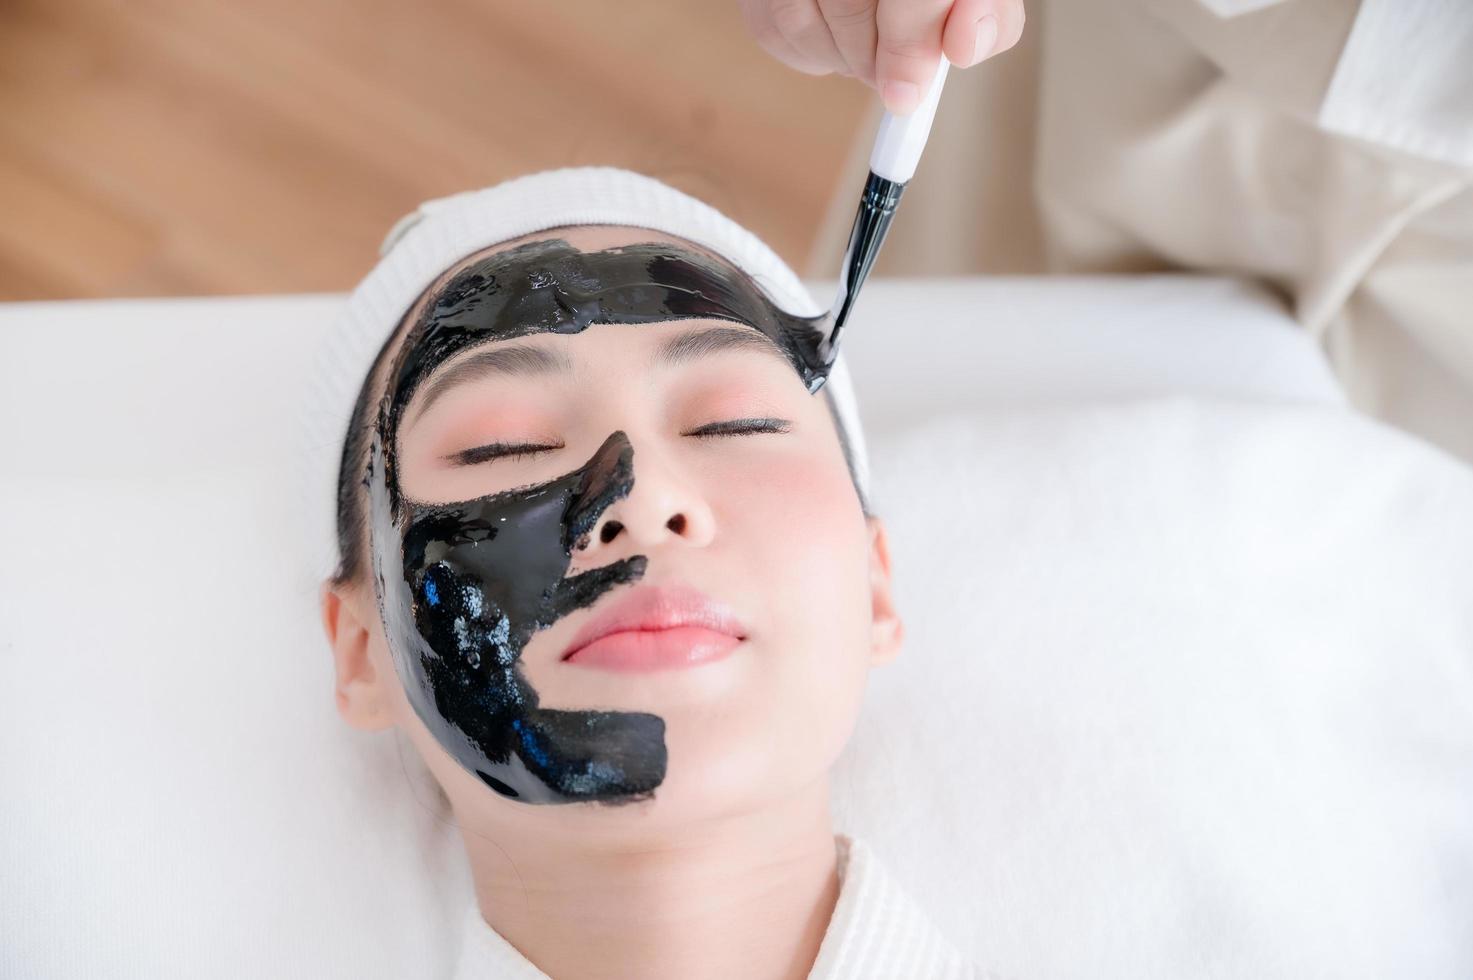 Professional masseuses in spa salons use spa mud brushes to give Asian beauties facial treatments photo